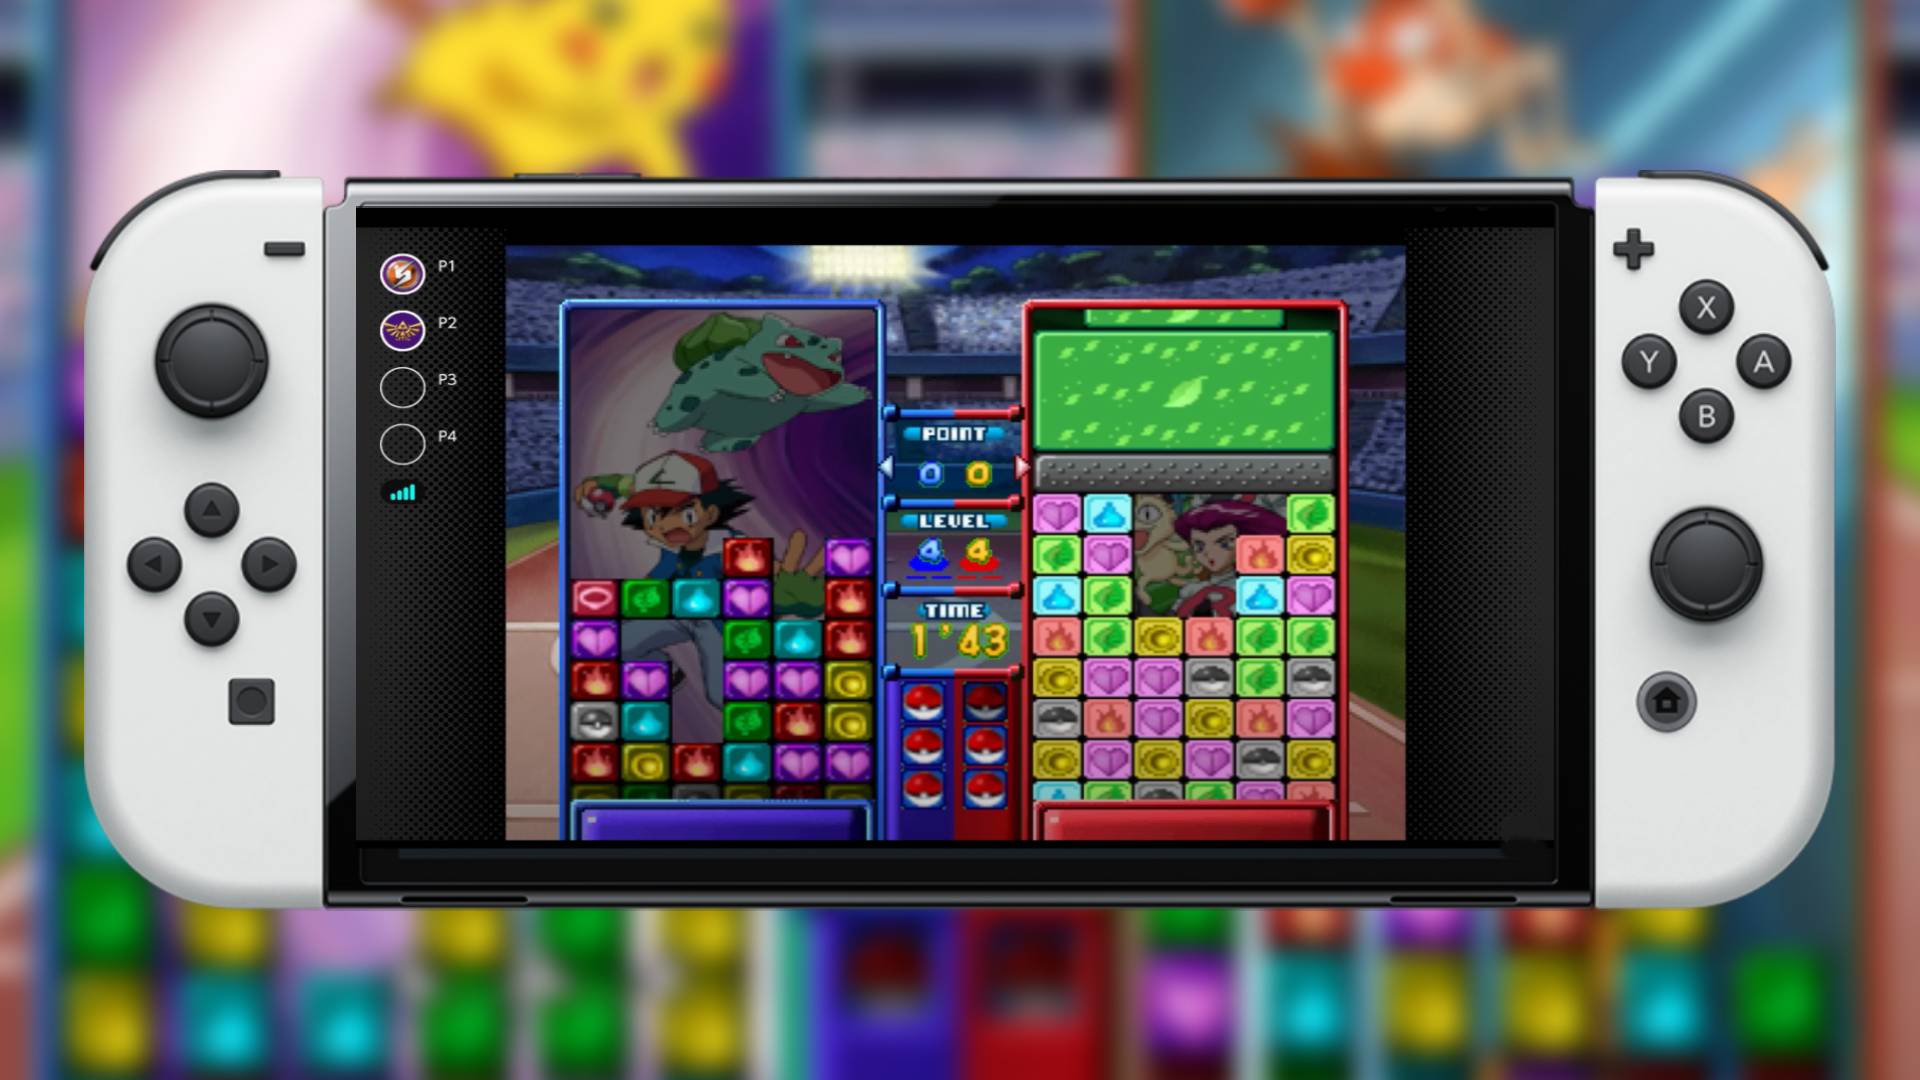 Nintendo Switch Online N64: A screenshot shows Pokemon Puzzle League running on a Nintendo Switch OLED Model 